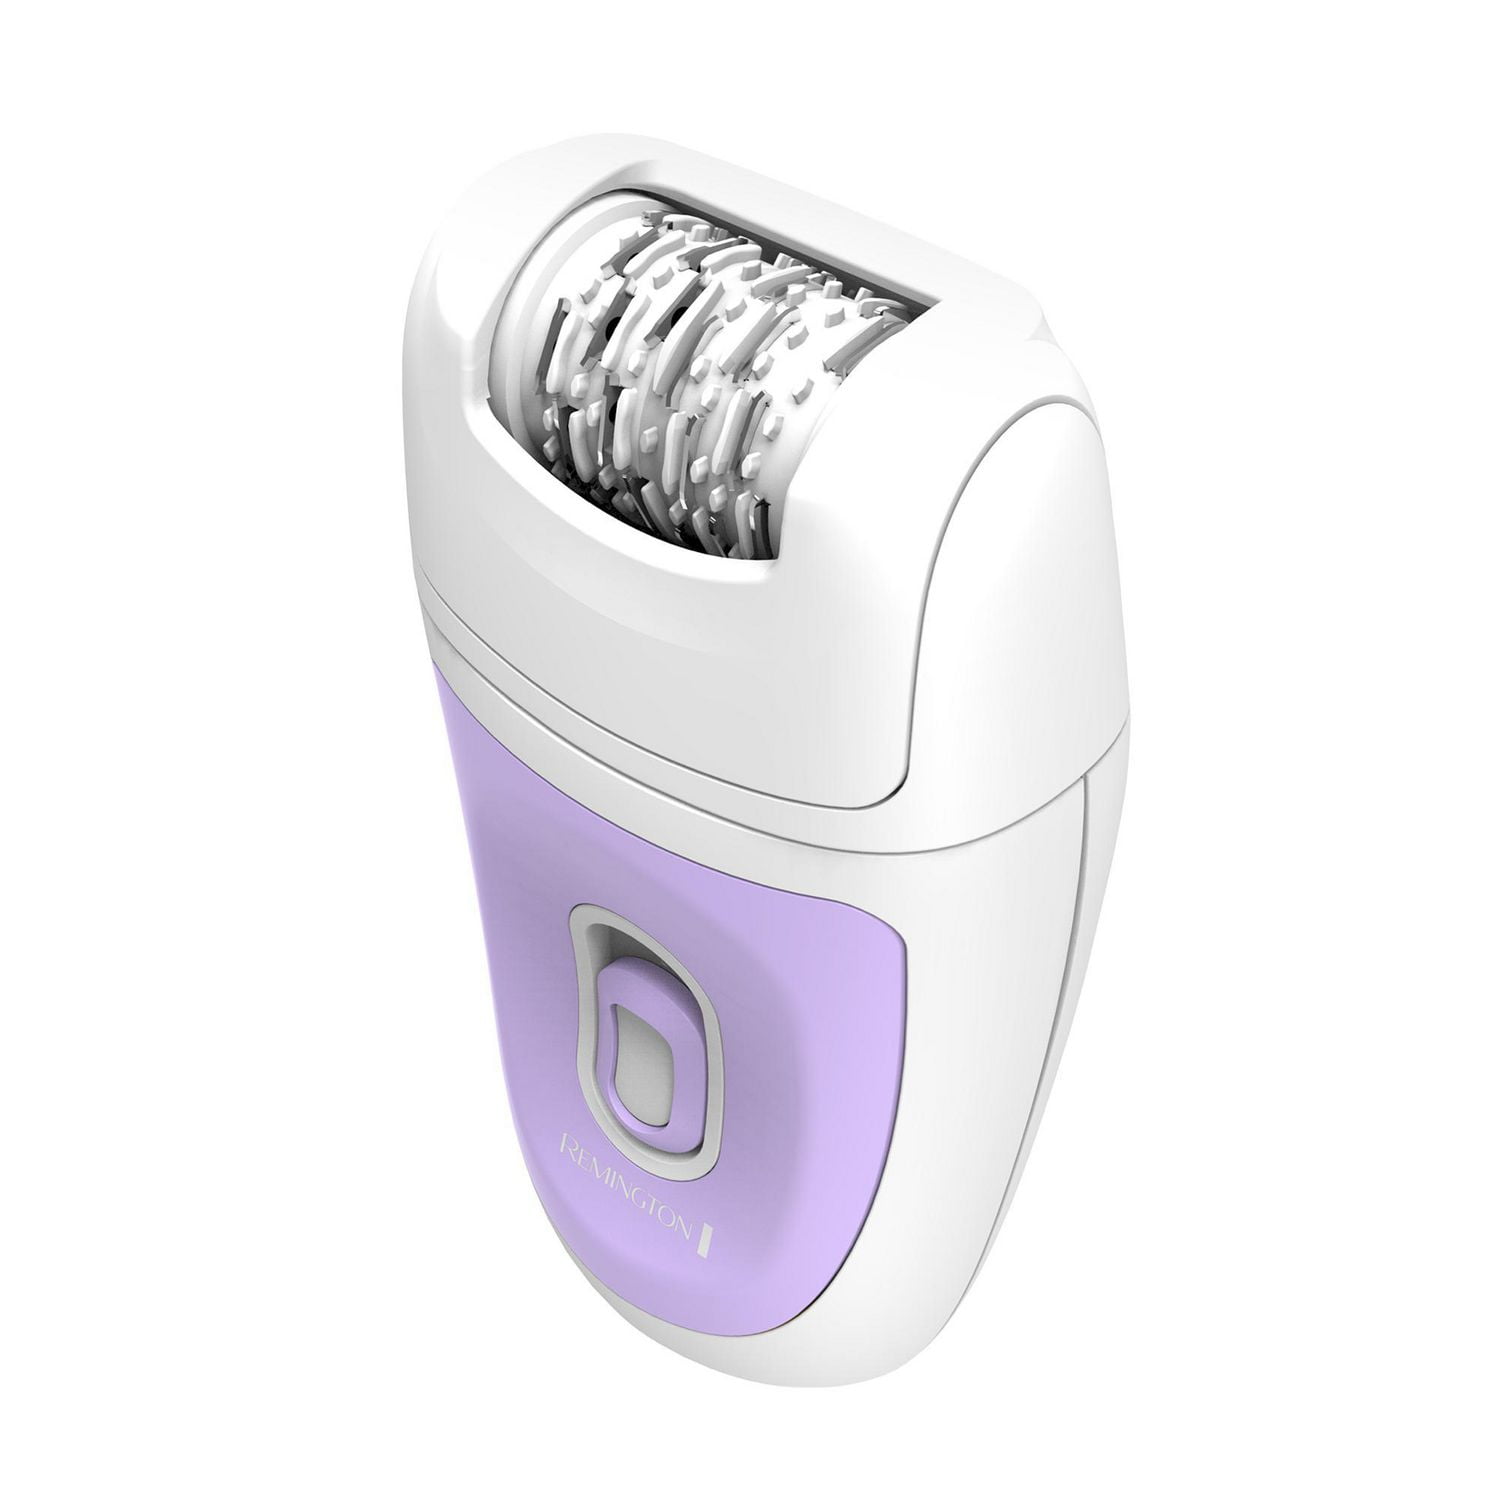 Remington Smooth & Silky Epilator, Newly designed for comfort 